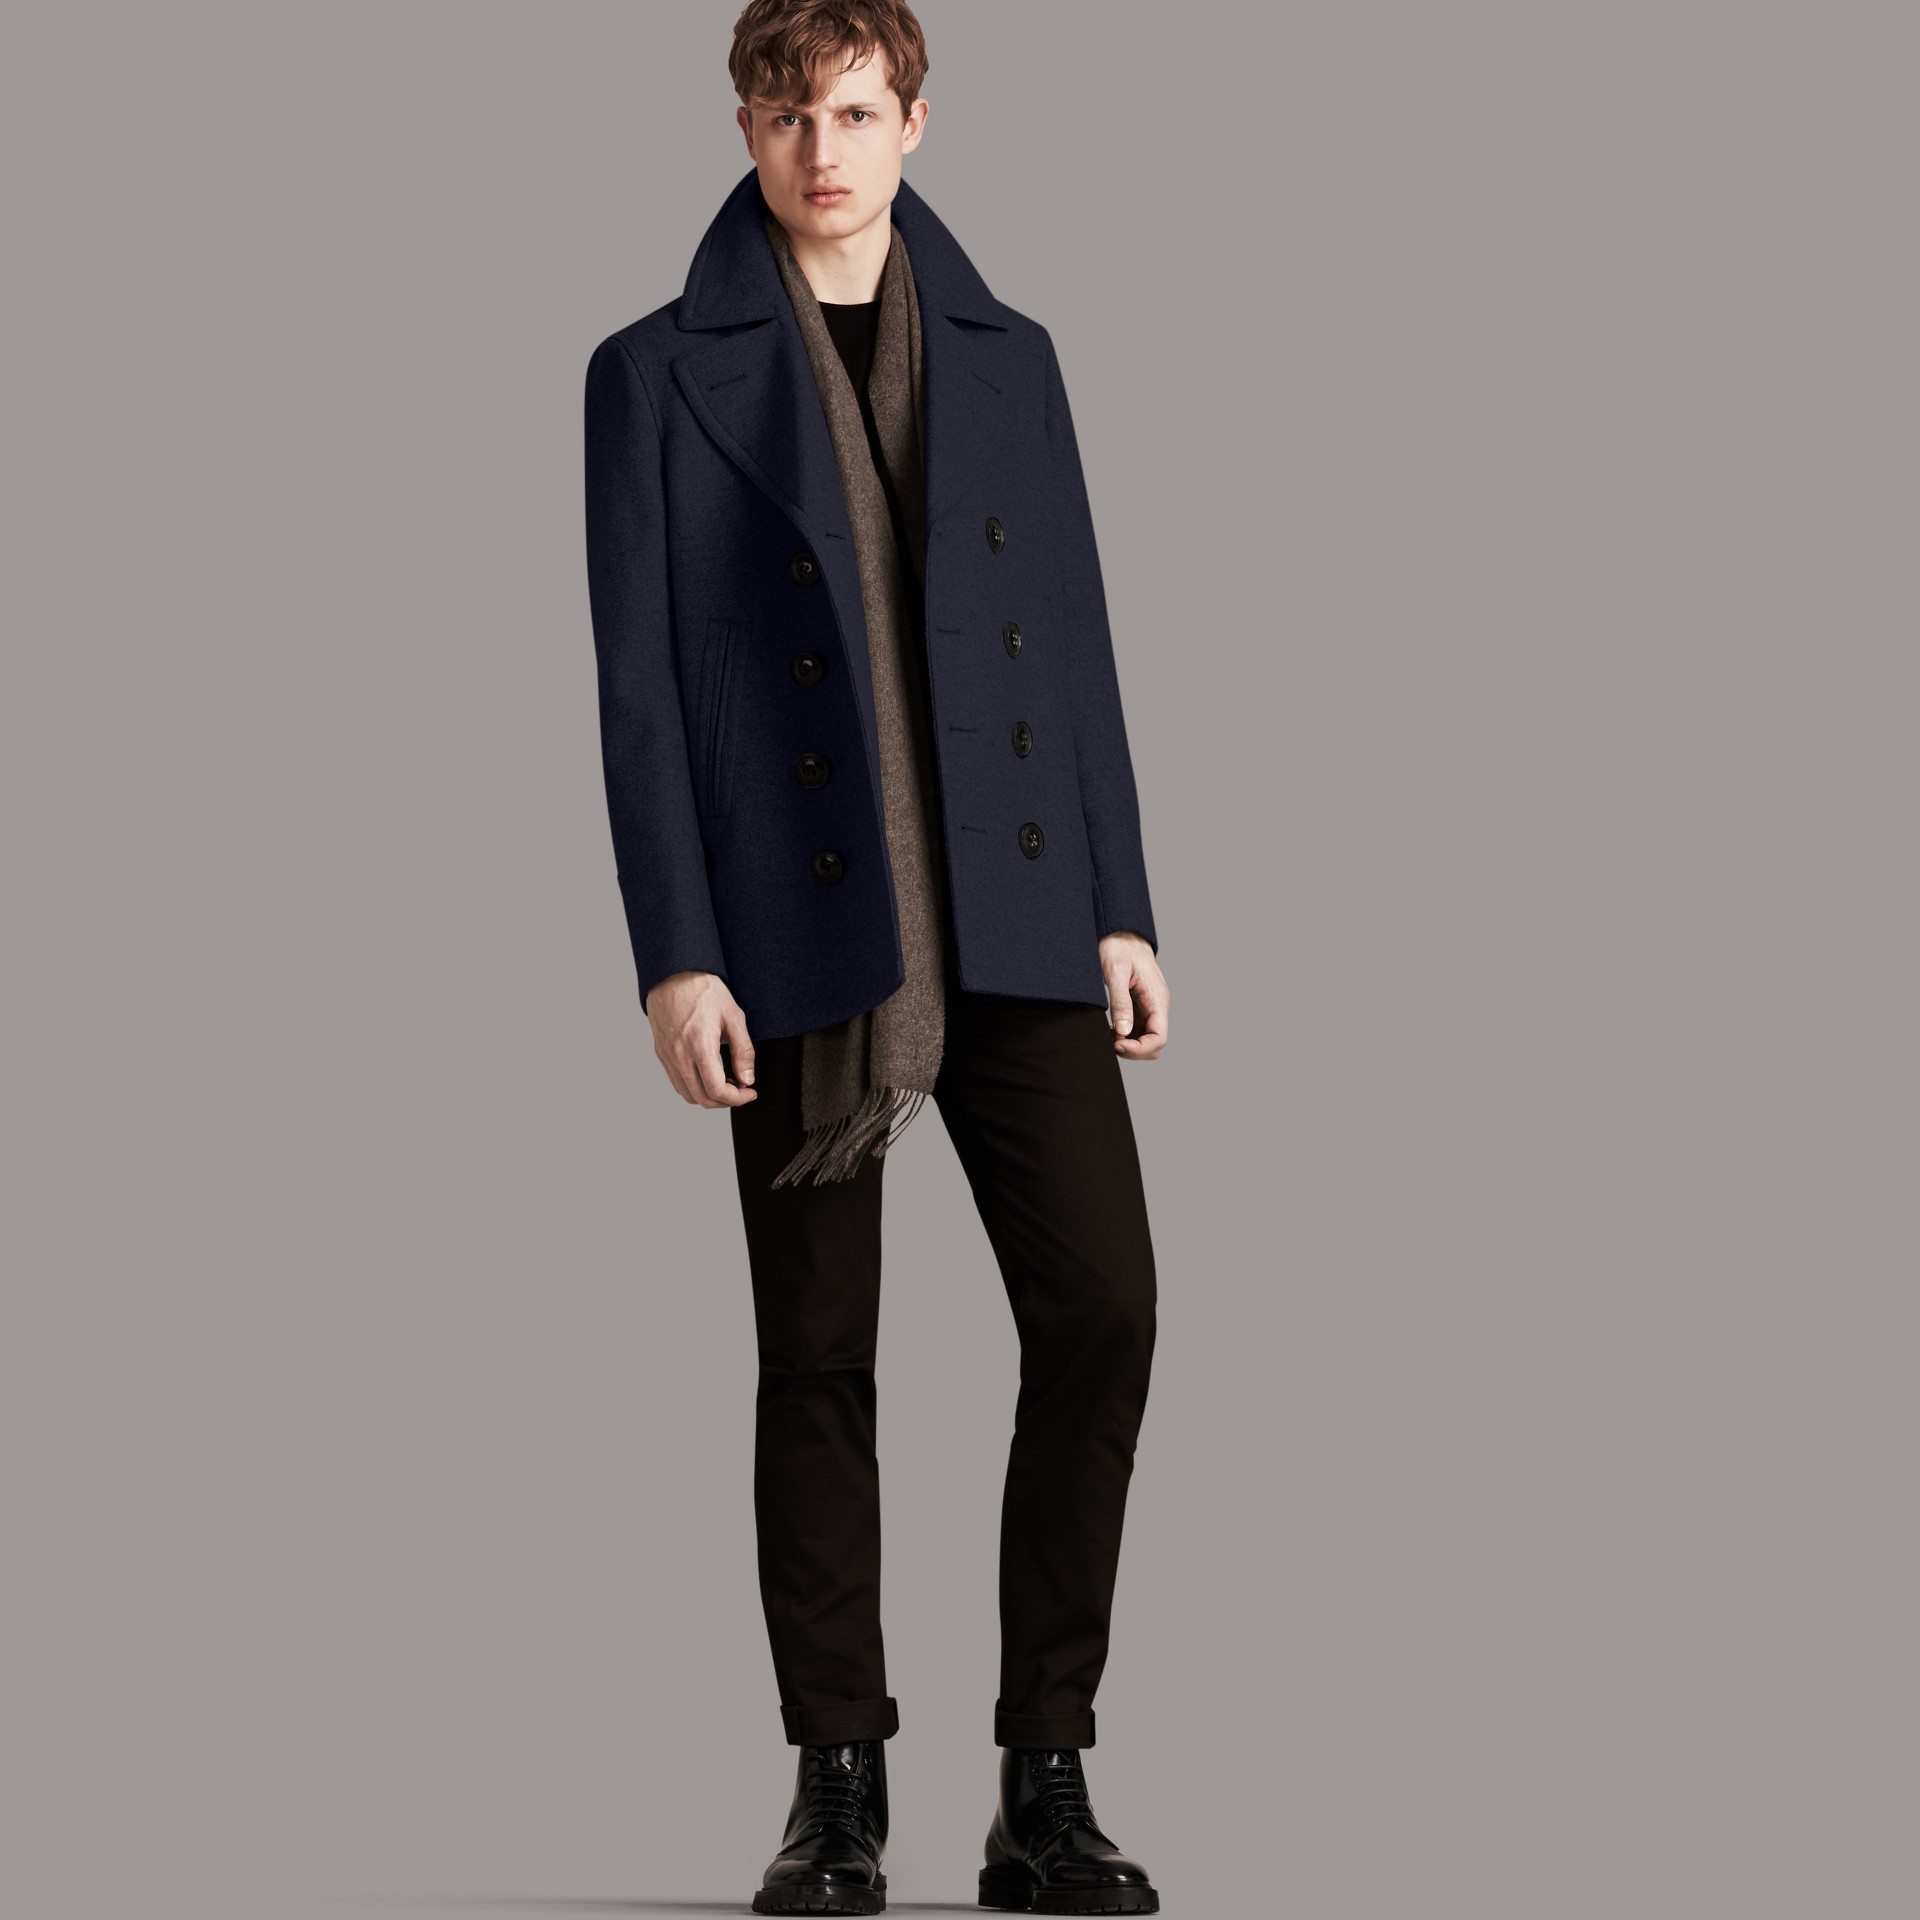 Wool Cashmere Pea Coat in Navy - Men | Burberry United States
 